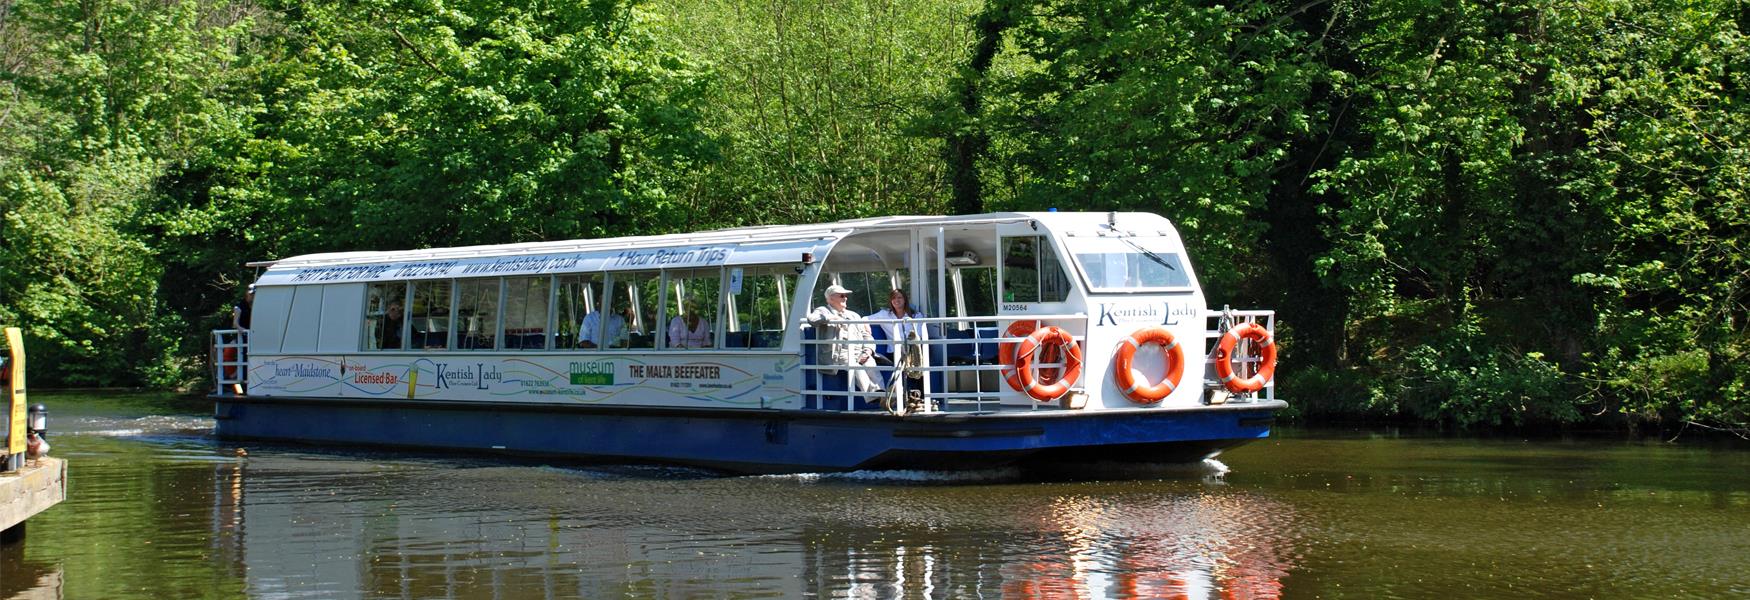 Kentish Lady River Cruises offer trips along the River Medway from Maidstone town centre to Allington Lock and to East Farleigh. An audio tour explains the history of the town centre as you cruise through and allows you time to enjoy the wildlife once you leave the town centre. One hour trips or three hours with a picnic lunch.